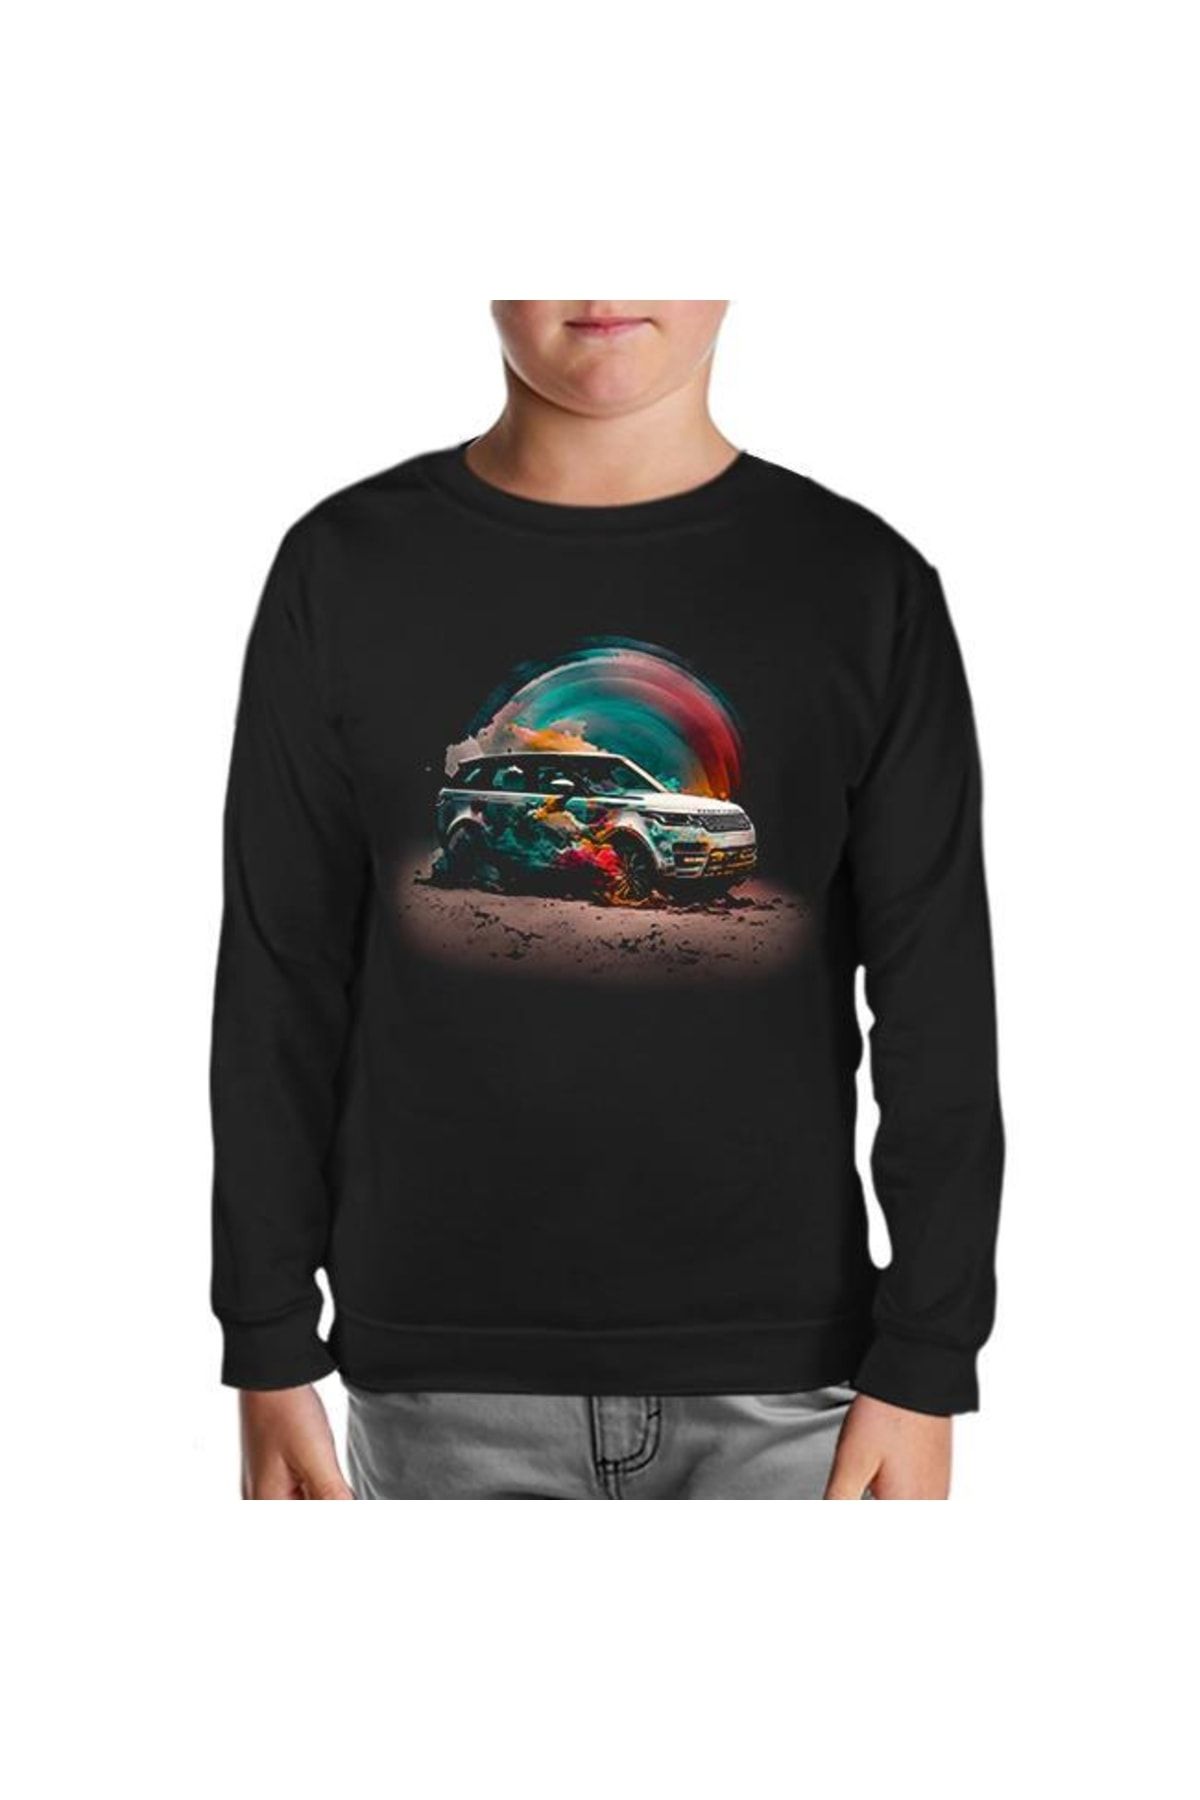 Lord T-Shirt Offroad Car With Colorful Dust Background Siyah Çocuk Sweatshirt